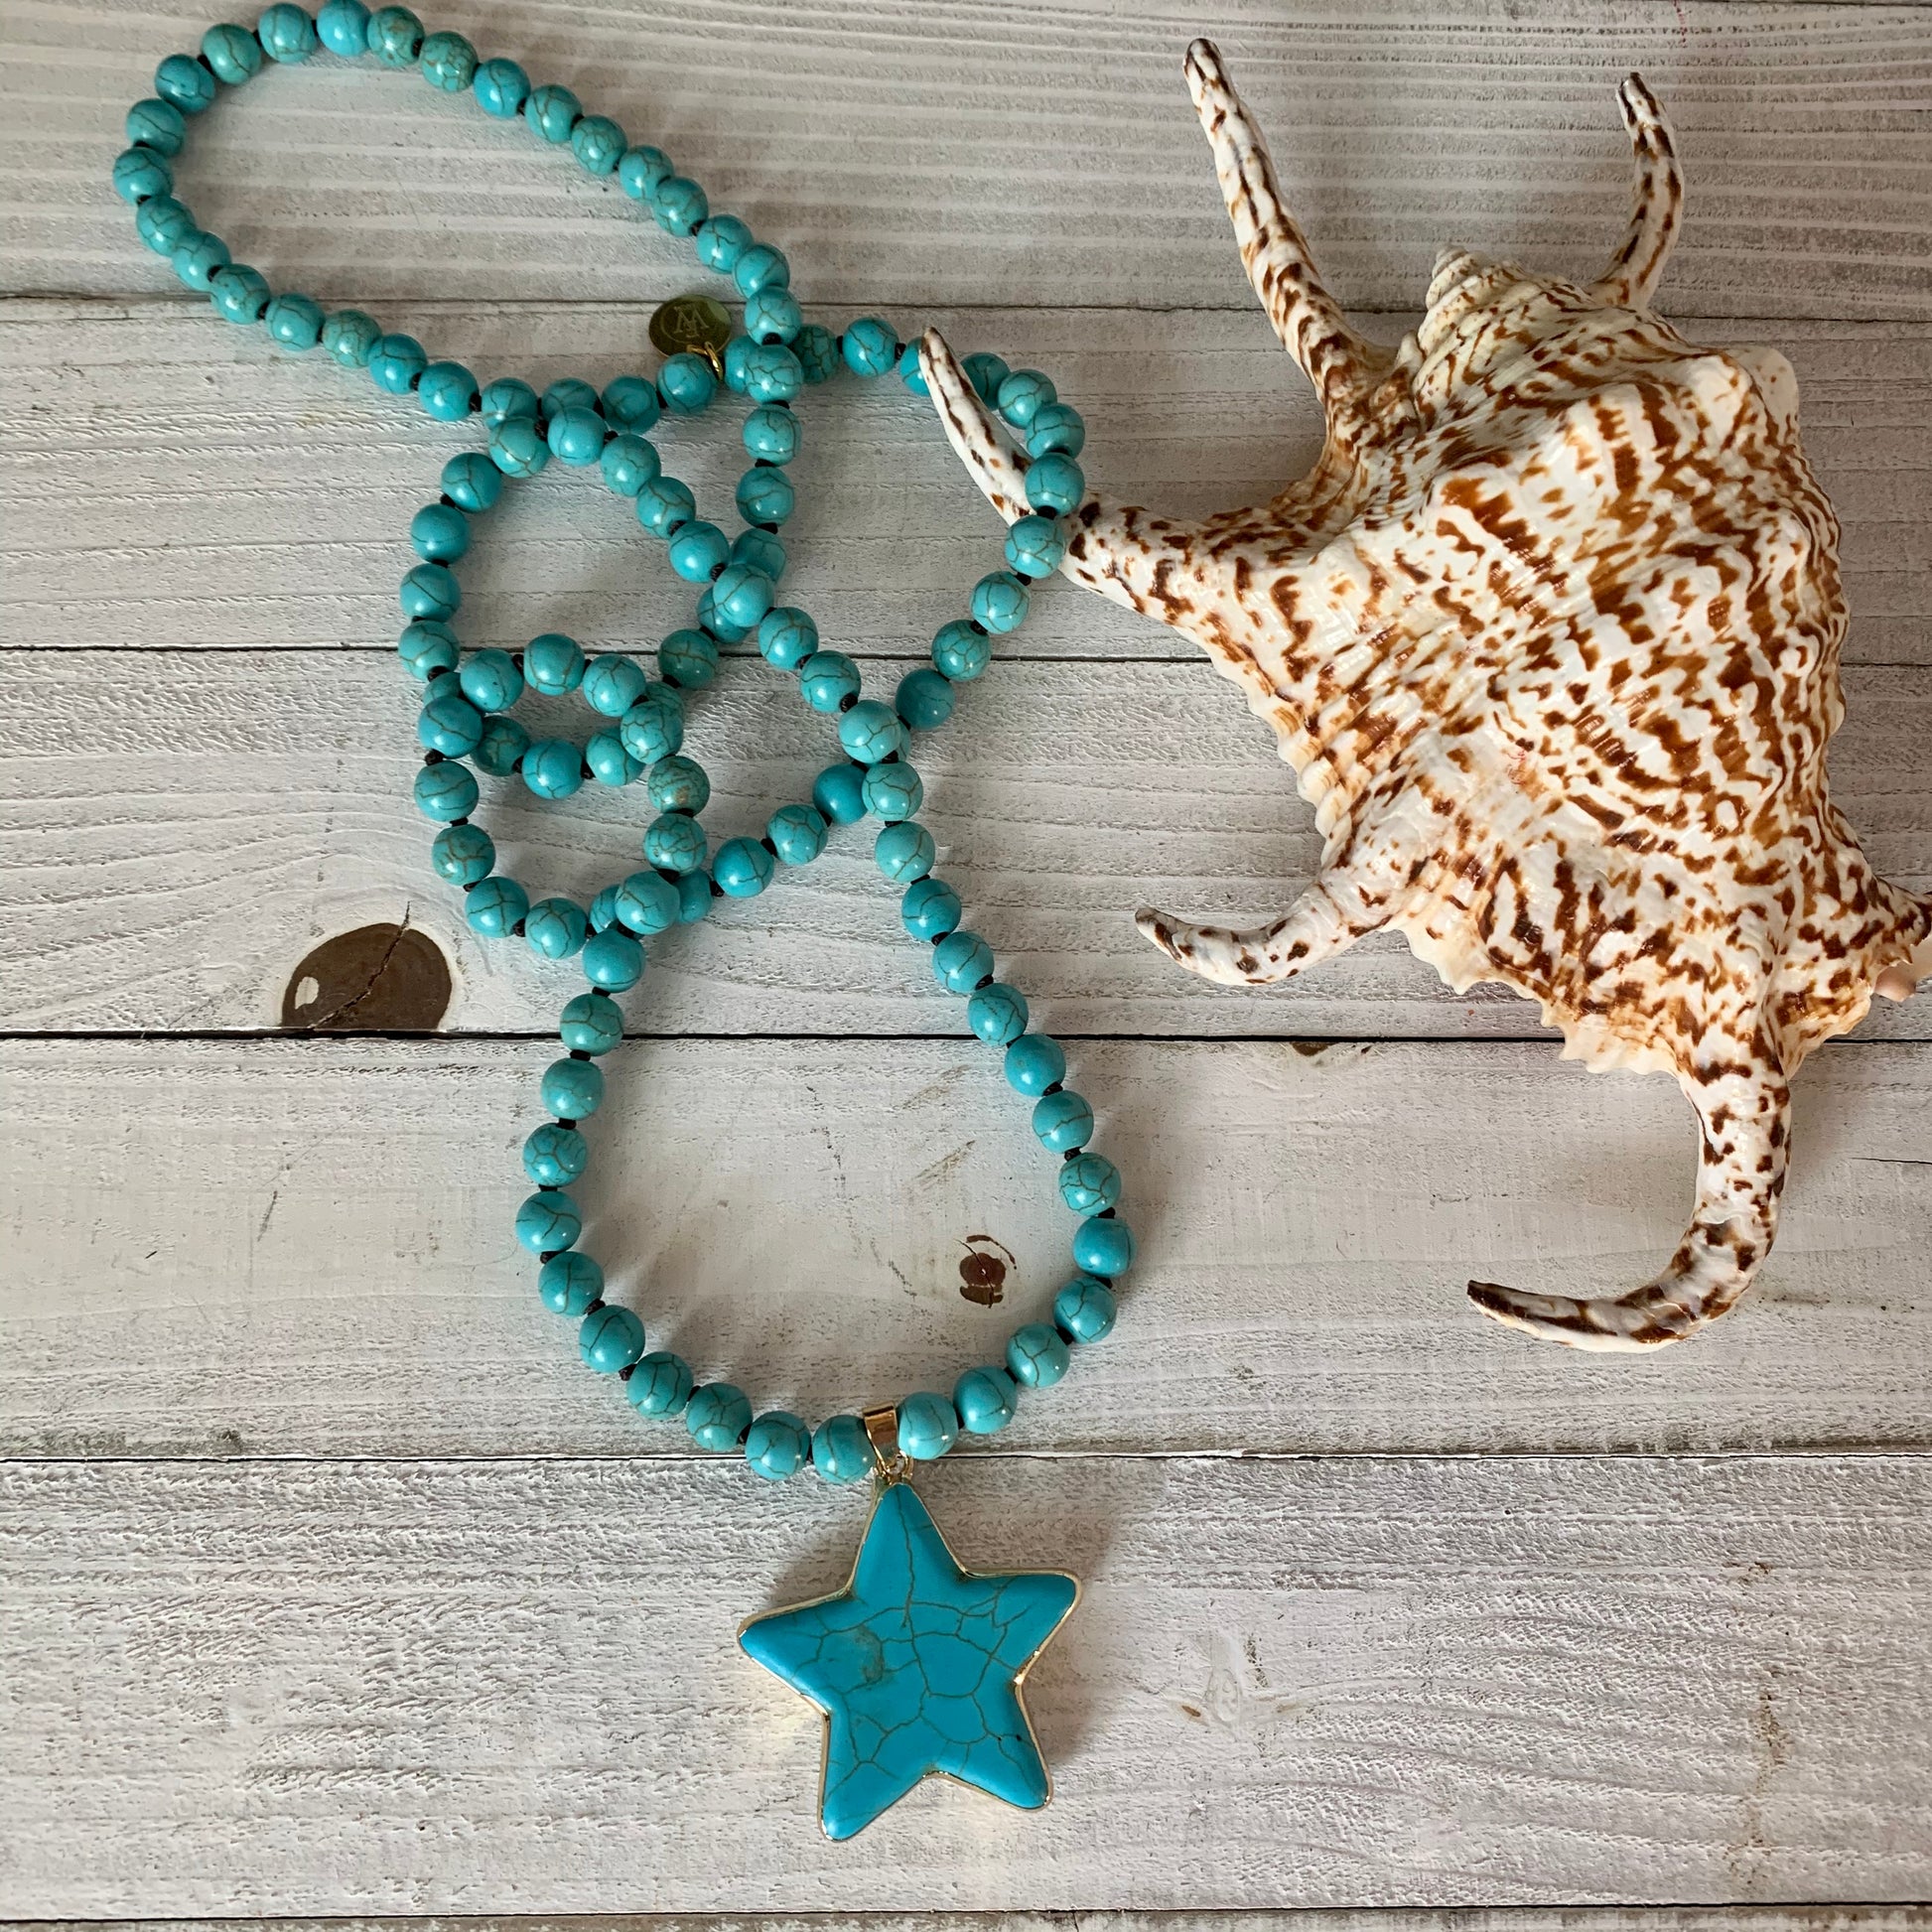 Necklace made out of Turquoise Magnesite Beads and it has a Lone Star Shape Pendant